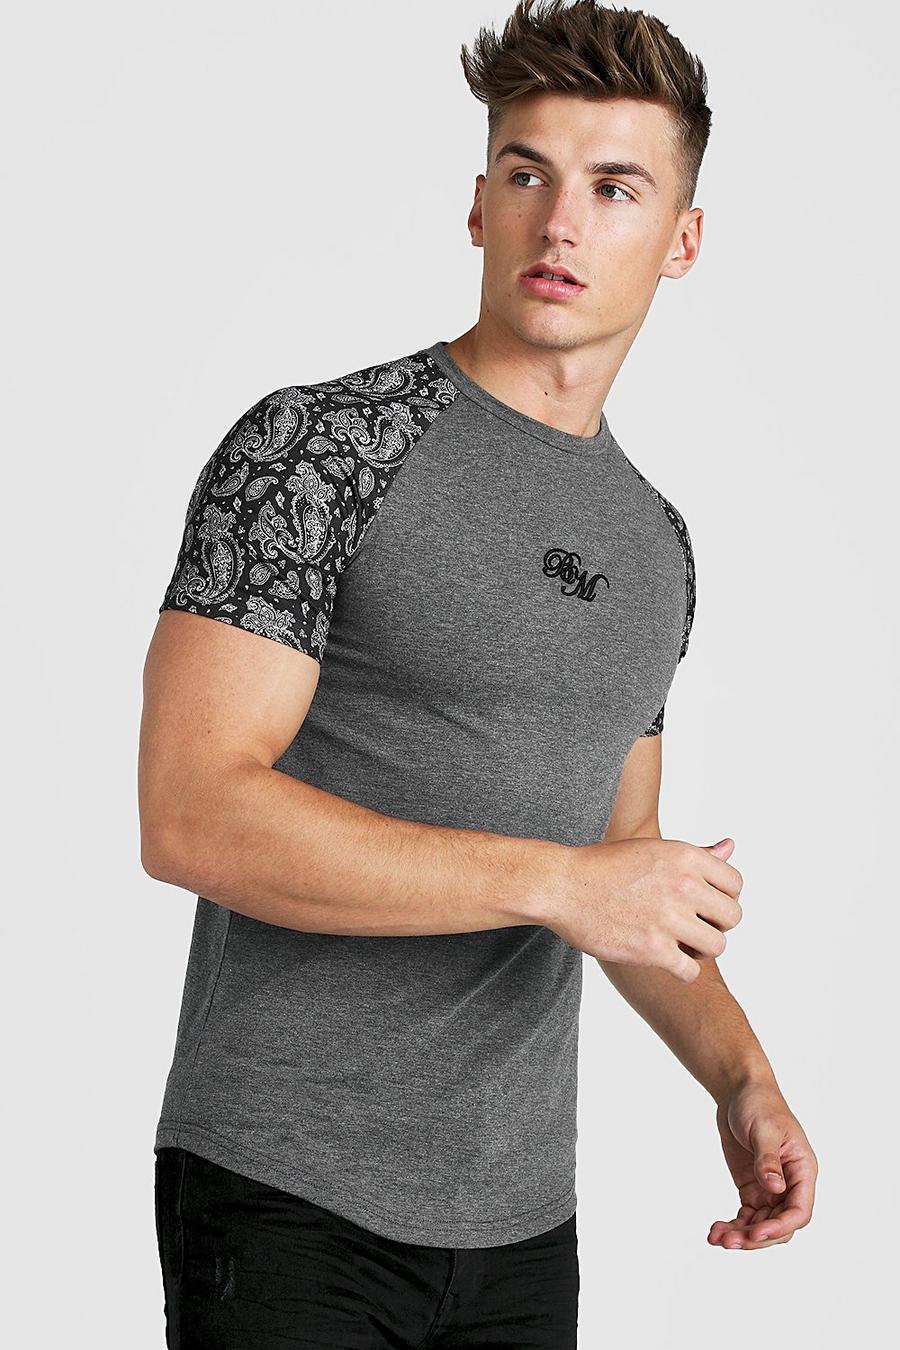 Charcoal BM Muscle Fit Embroidered Paisley Print T-Shirt image number 1